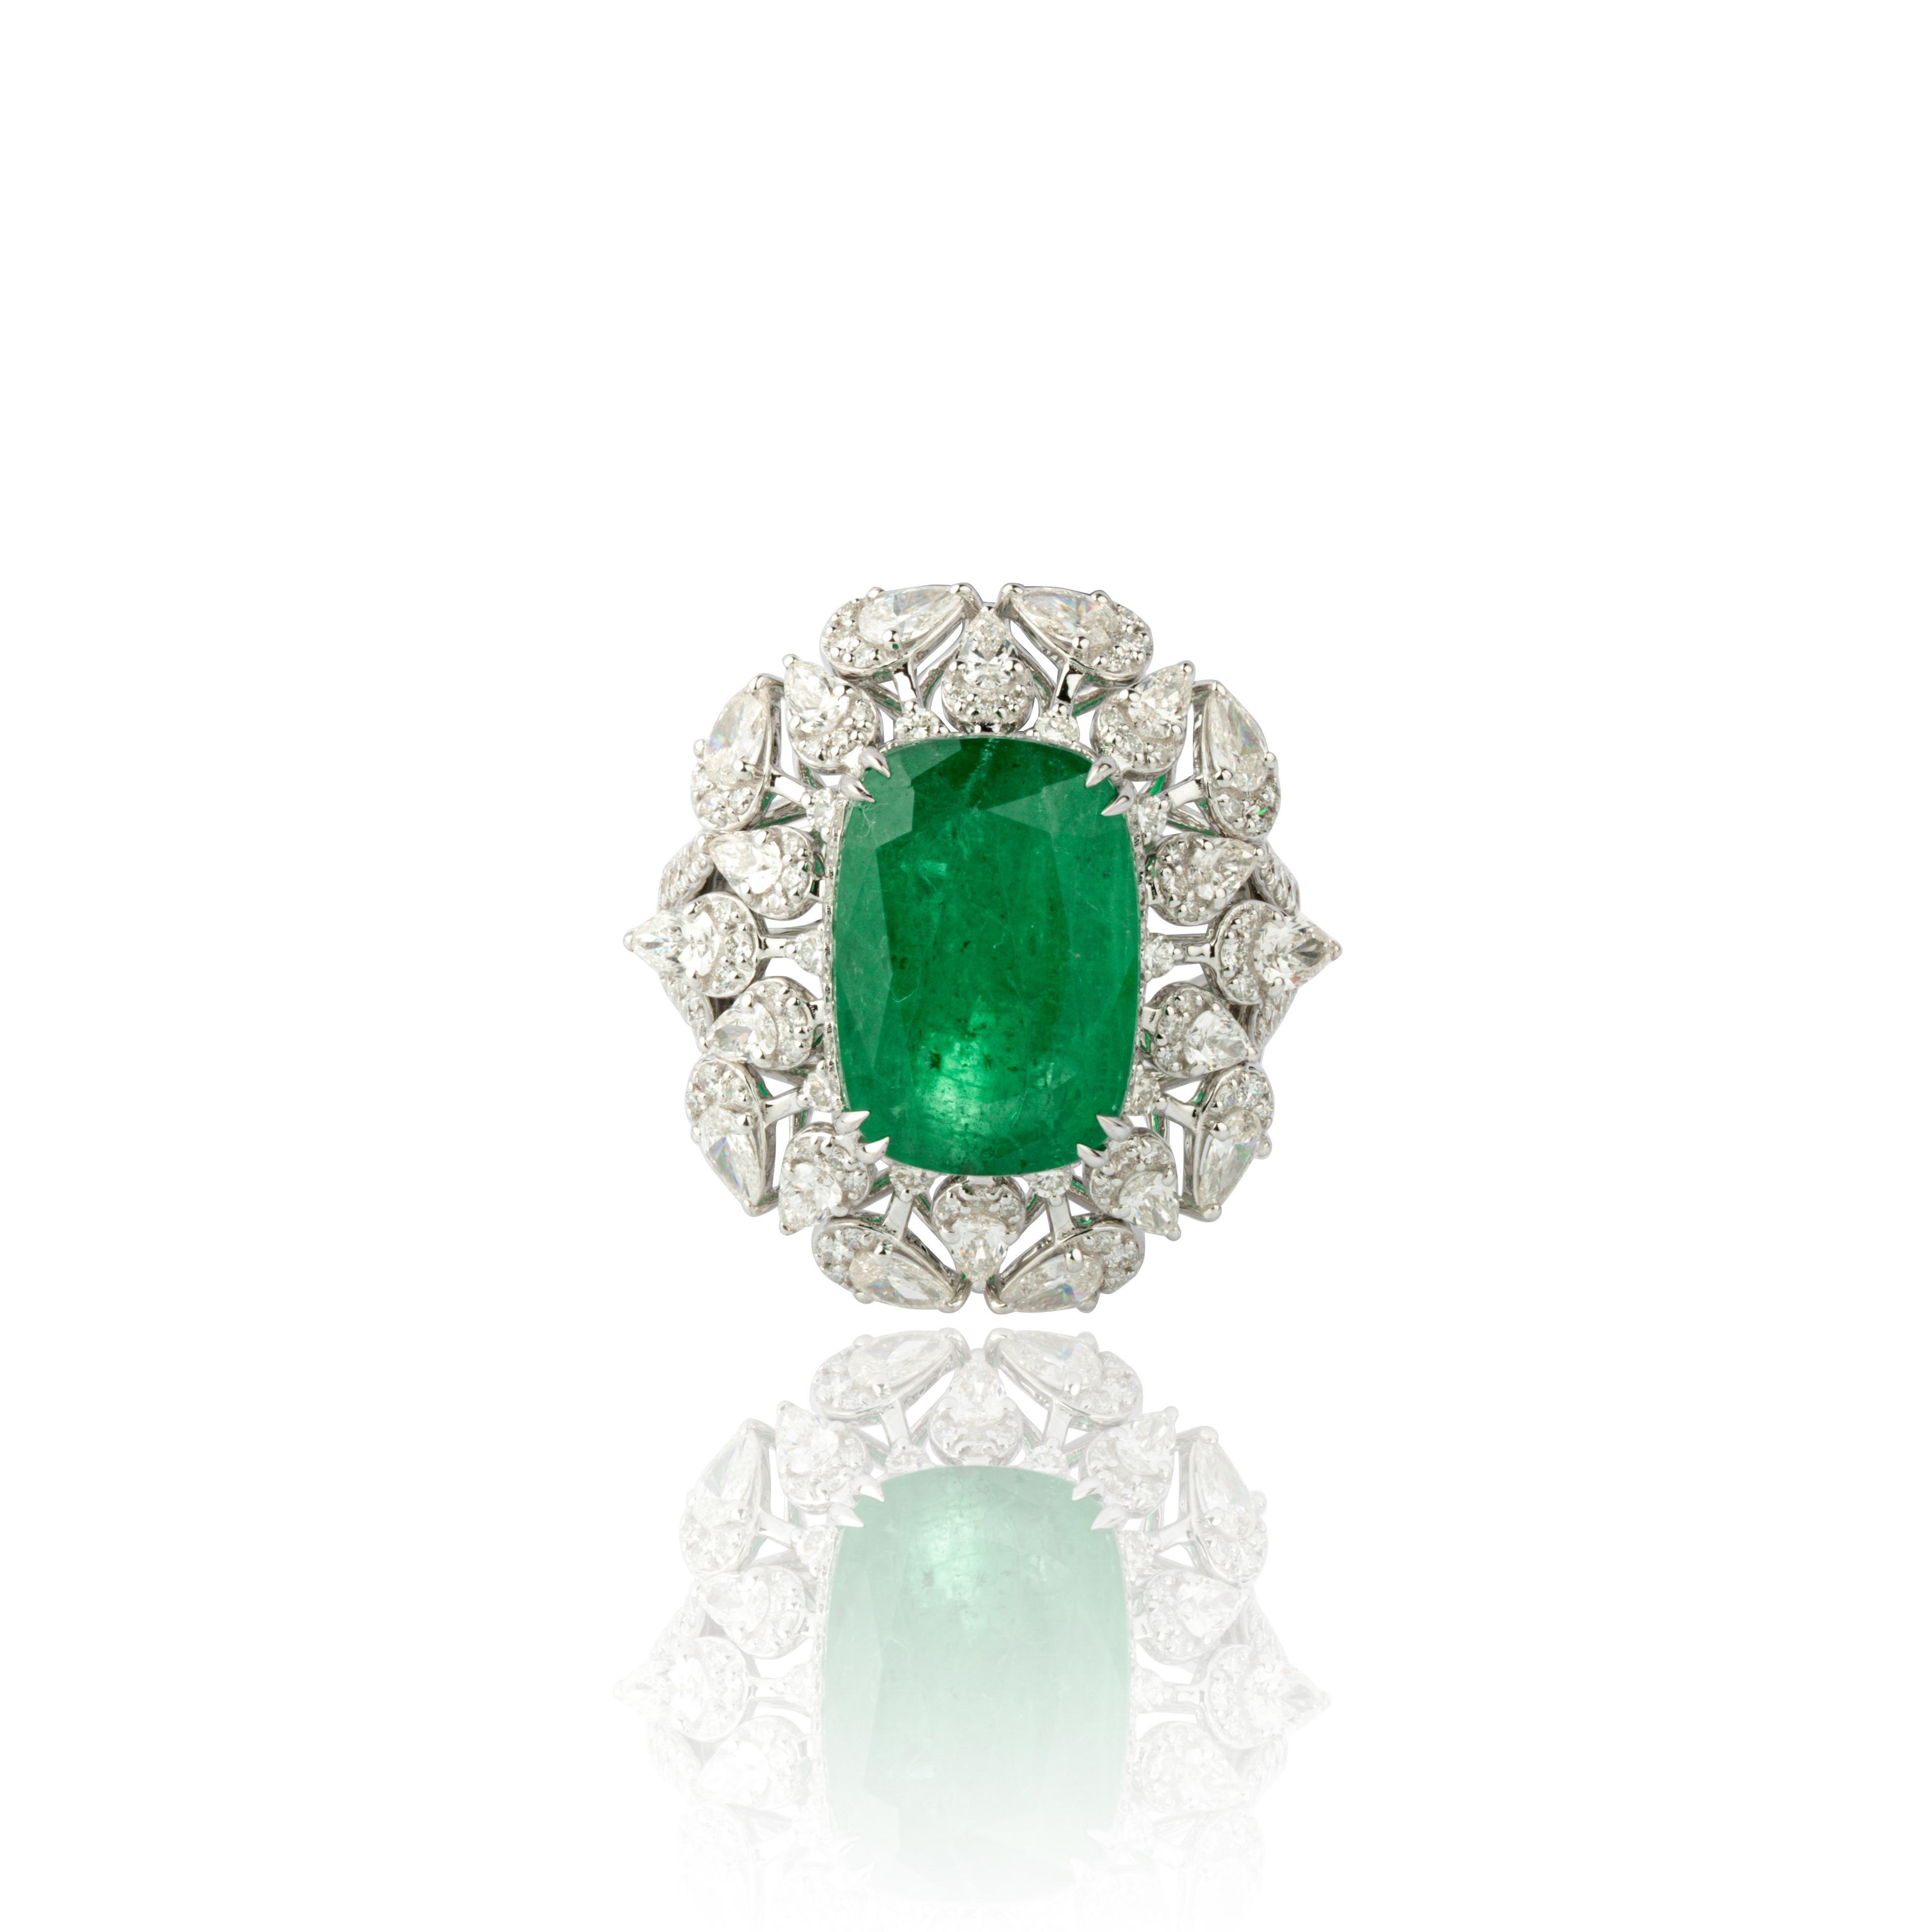 Diamonds : 1.86 carats
Emeralds : 6.16 carats
Gold : 7.49  gms
Introducing our exquisite 18 Karat White Gold Ring featuring a stunning 6.16 carat natural Zambian Emerald and 1.86 carats of diamonds. This ring is truly remarkable, showcasing the